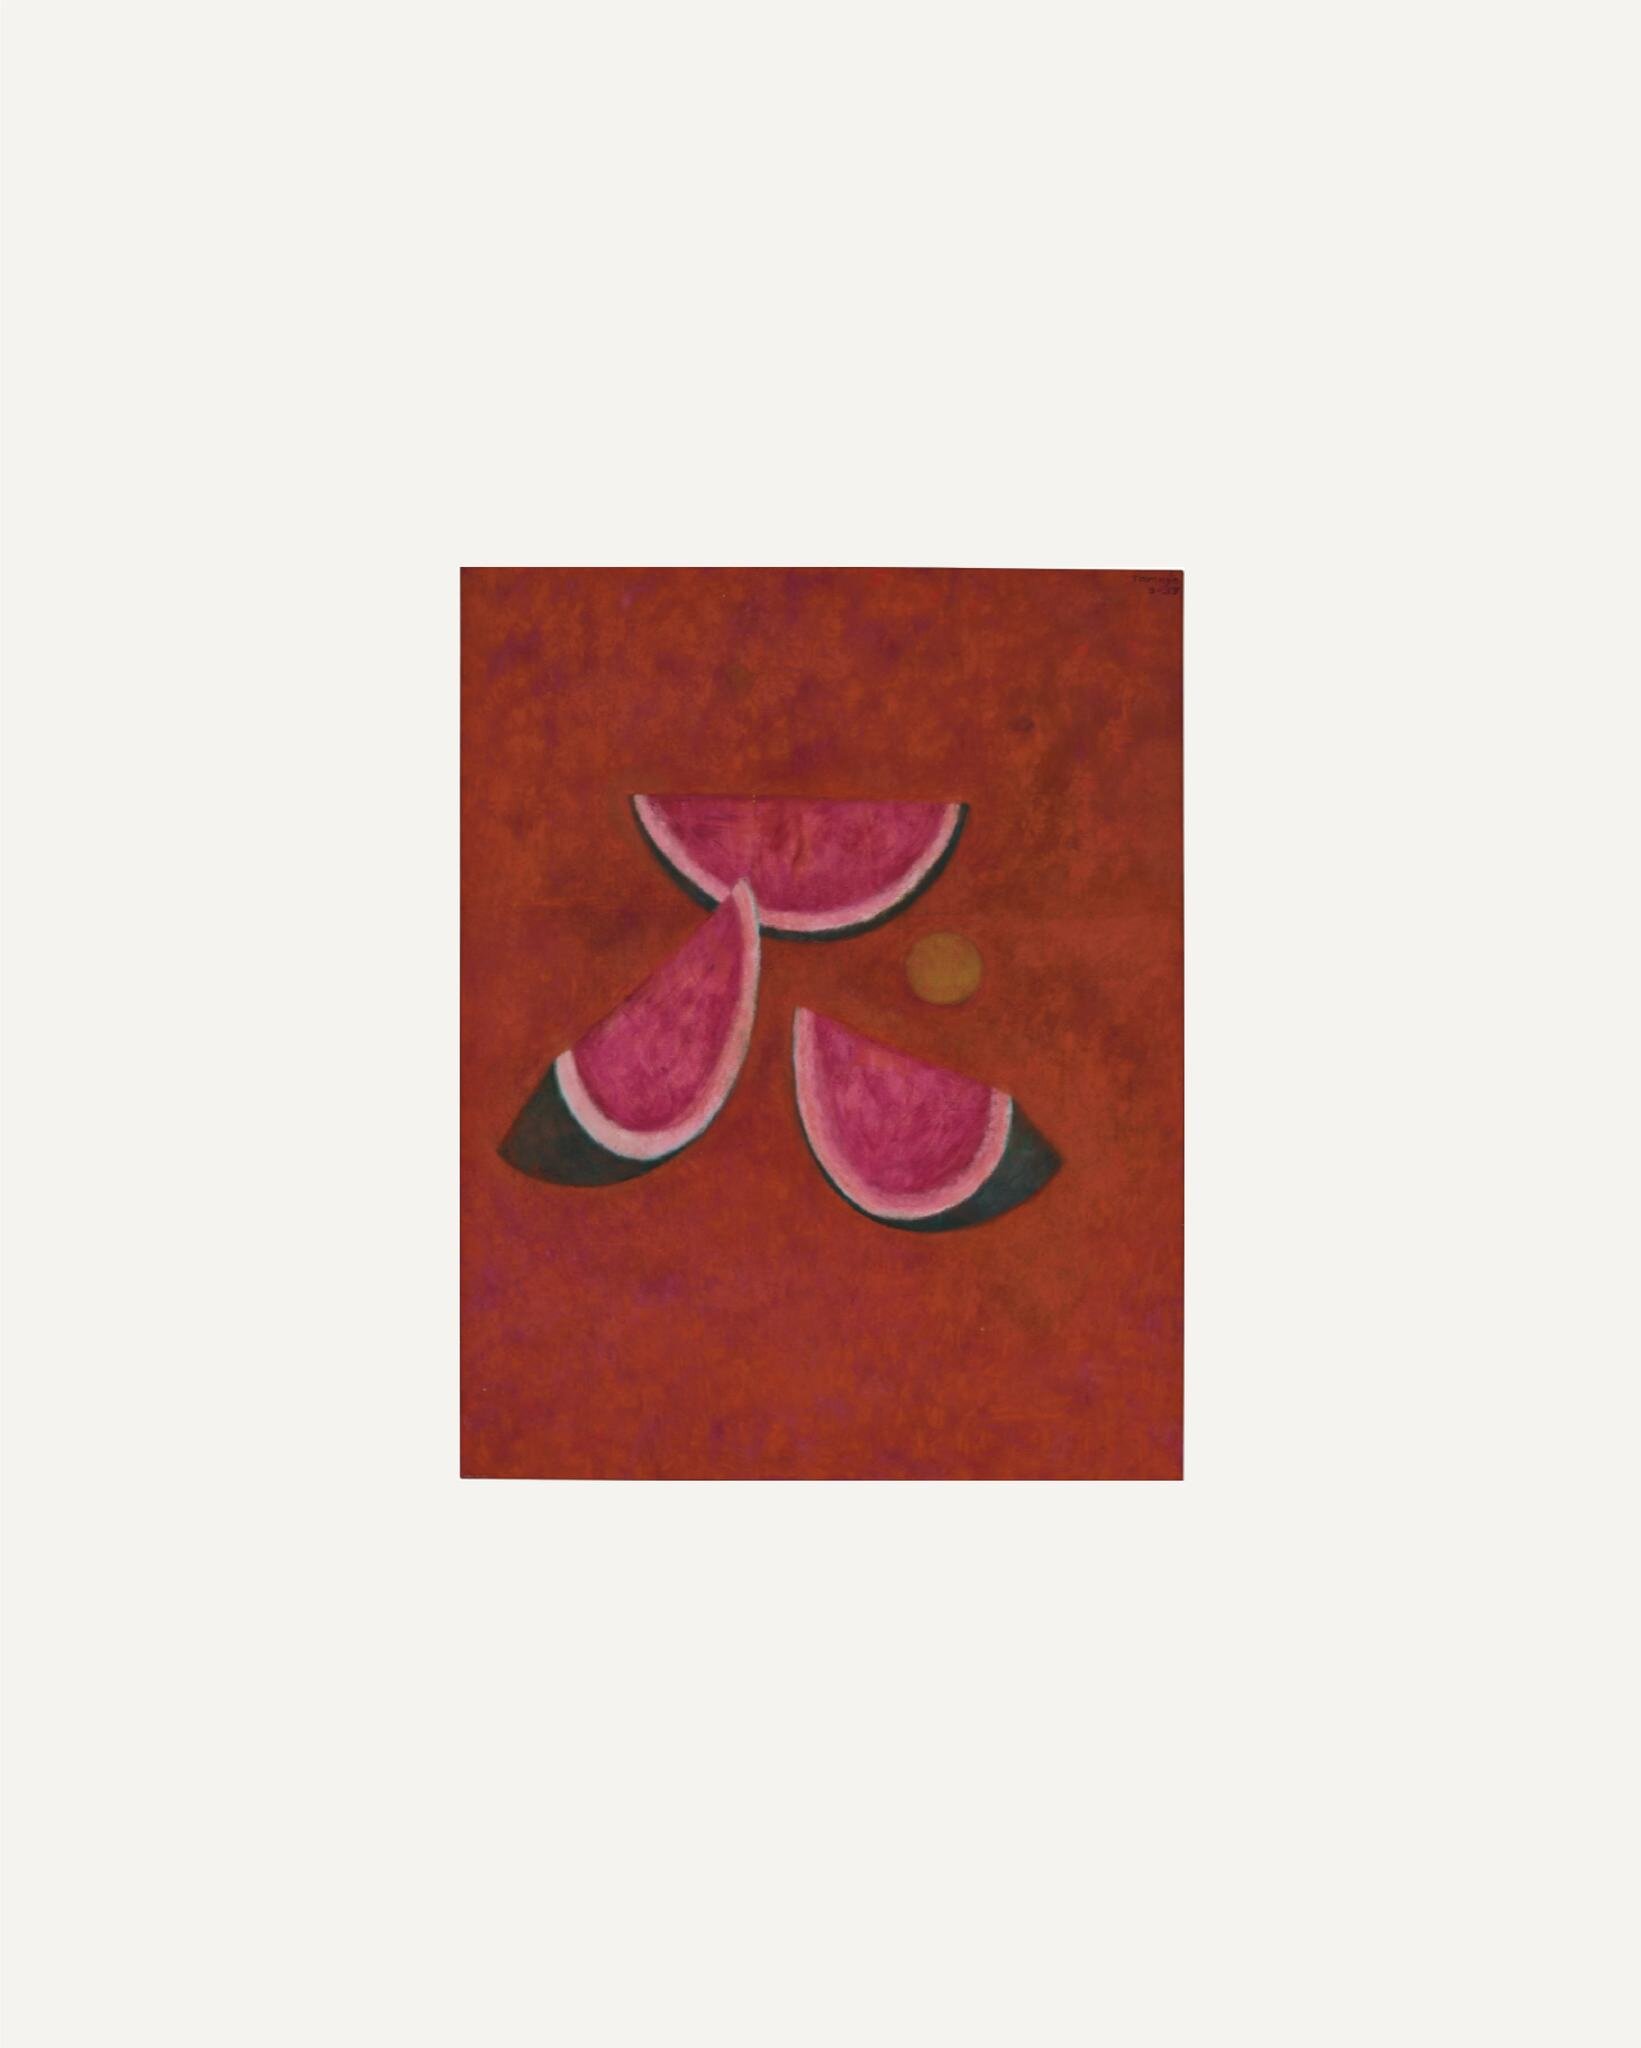 Reference : Sandias y Naranja, Rufino Tamayo. 1957.
Beautifully displayed shades of reds and composition of shapes. 
When I was a child, one of my parents' friends had a painting like this Tamayo in their living room. I never understood it then but I